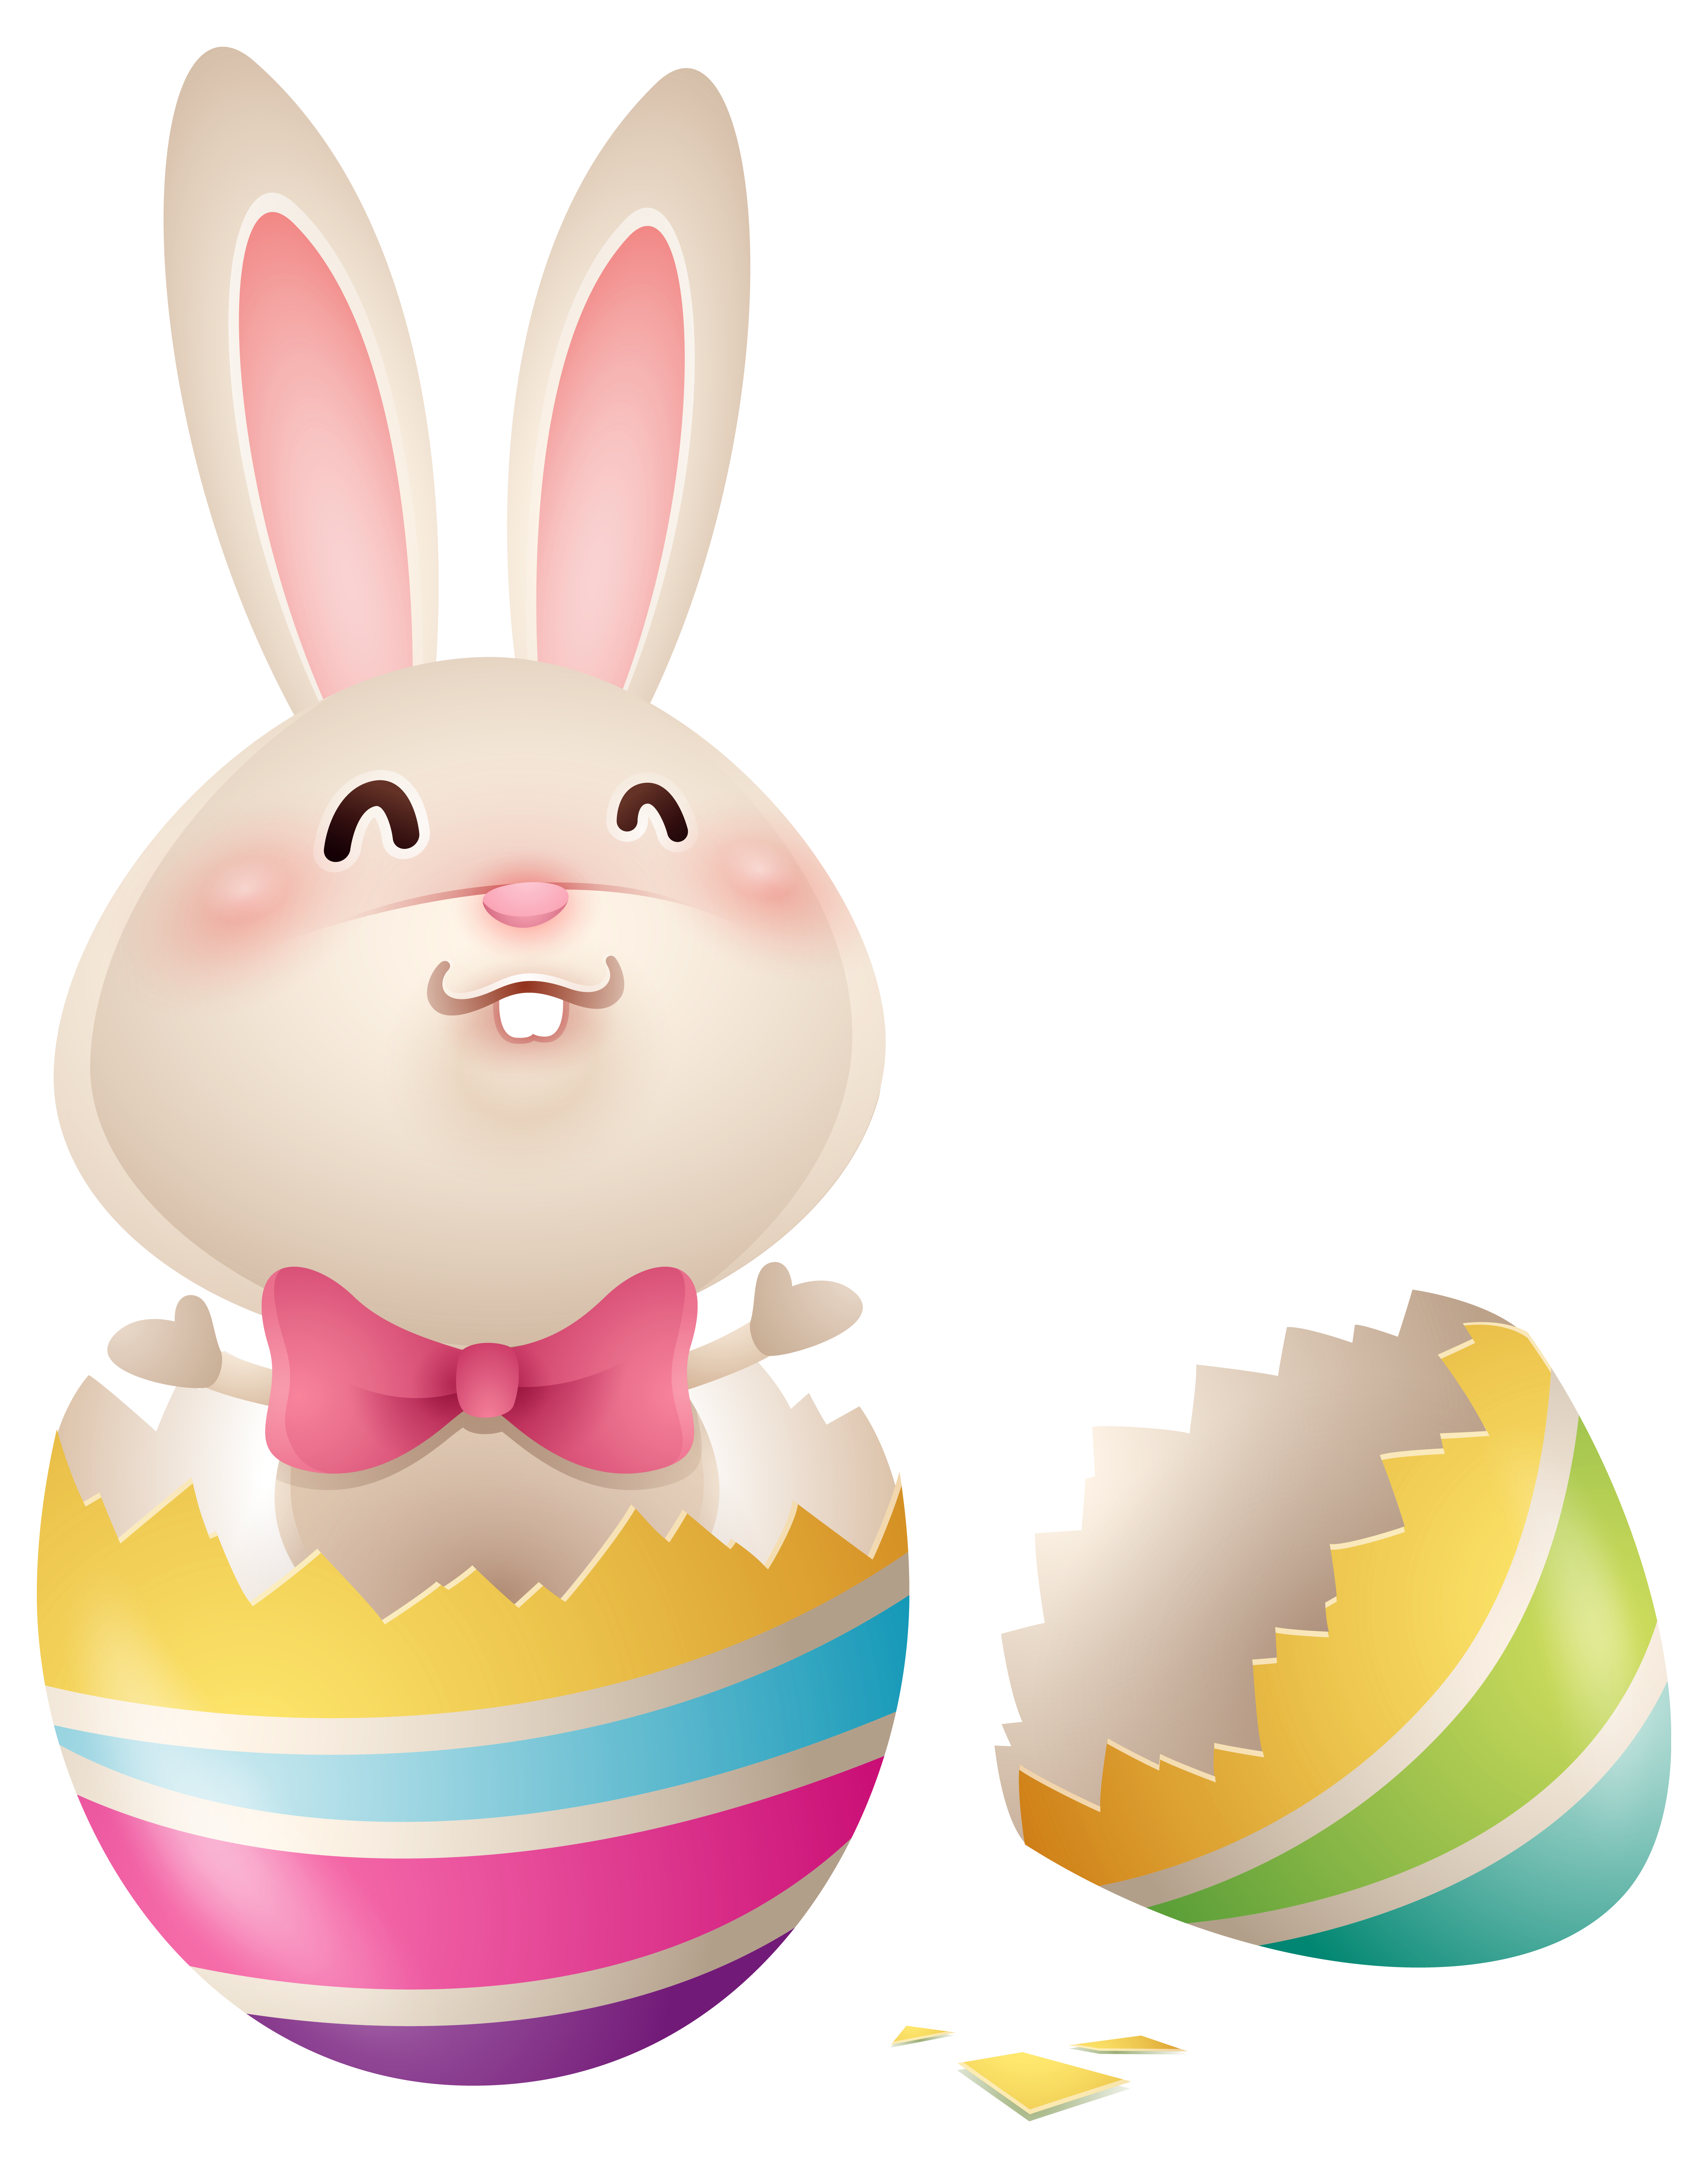 Egg Easter Bunny Rabbit In PNG File HD Clipart